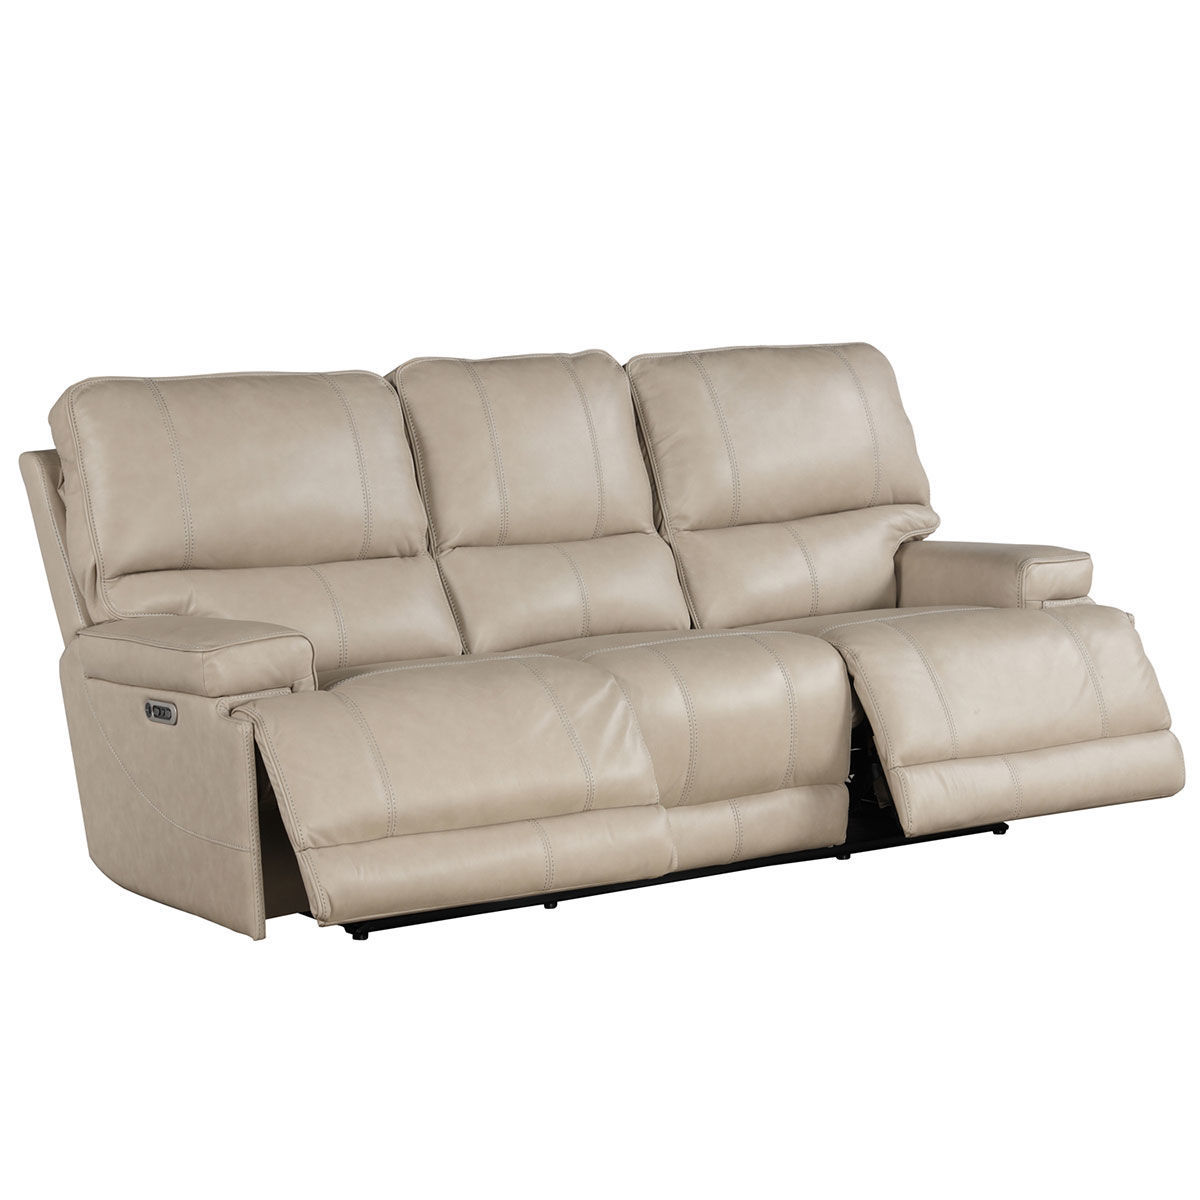 Picture of WHISTLER CORDLESS SOFA W/ POWER HEADREST IN LINEN